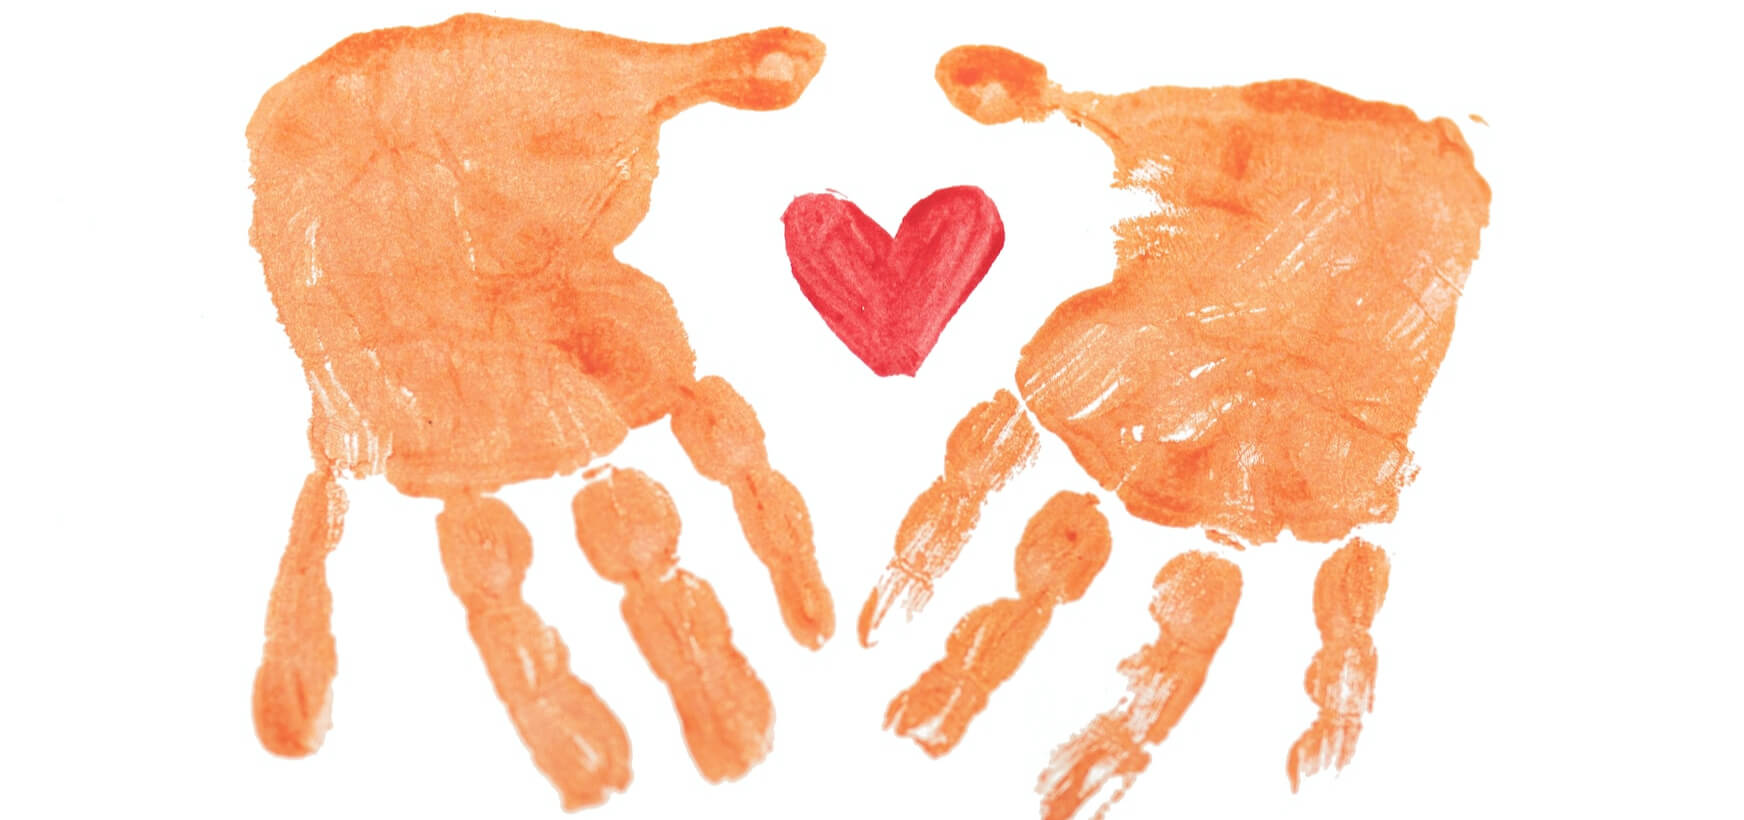 the image shows a child's painted handprint with a painted heart which represents our free creative support services for children impacted by mental health needs.